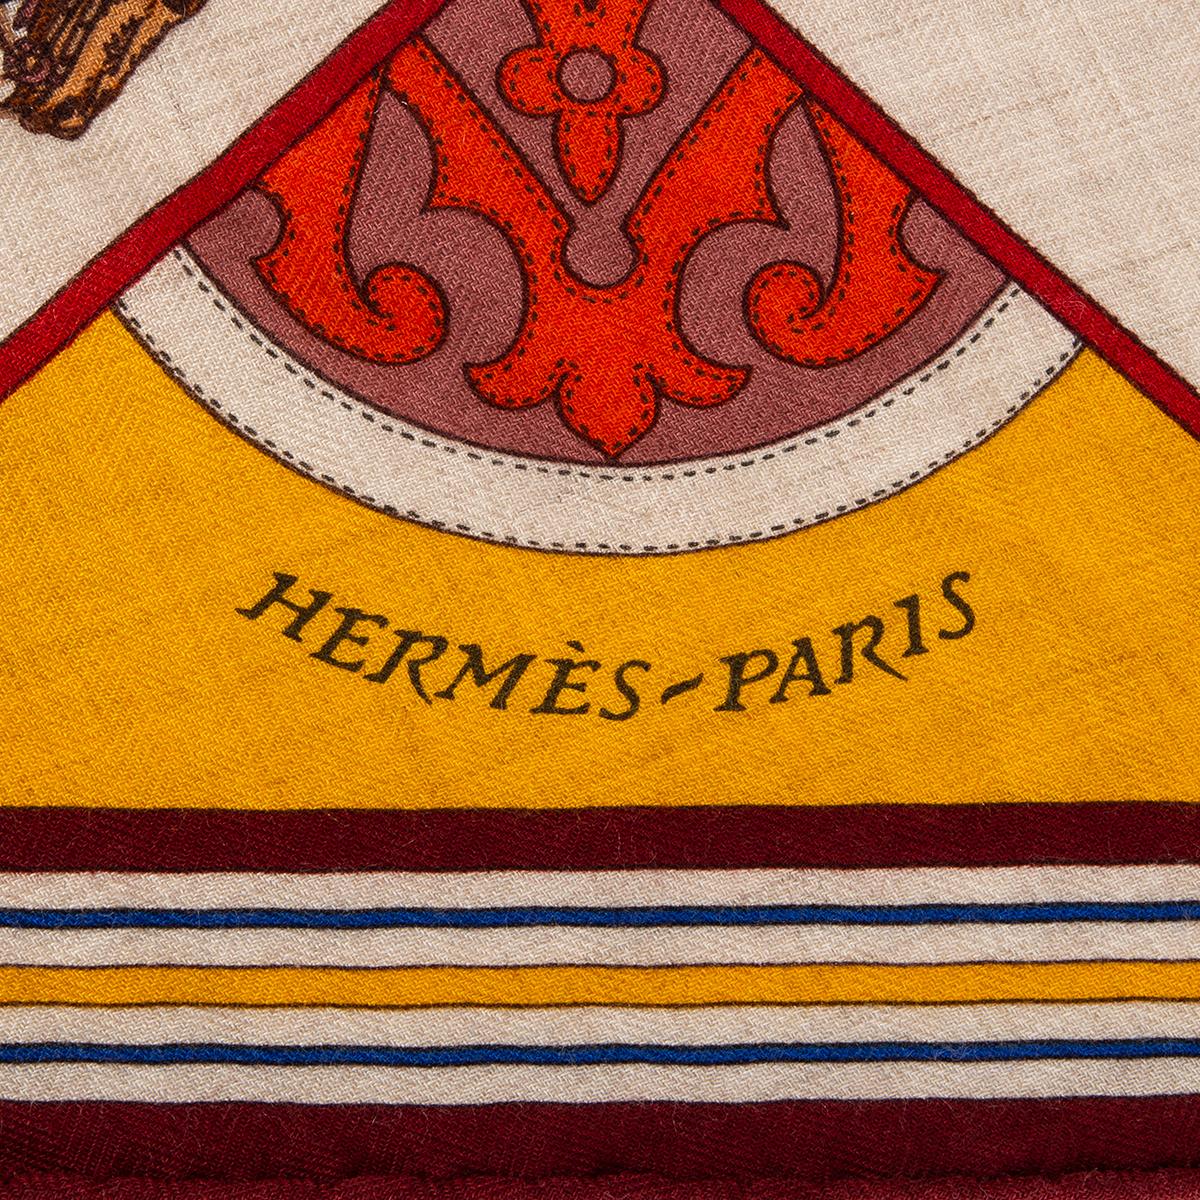 Hermès 'Couvertures Nouvelles Losange' scarf in multi color cashmere and silk (assumed as tag is missing). Has been worn and is in excellent condition.

Width 48cm (18.7in)
Length 114cm (44.5in)